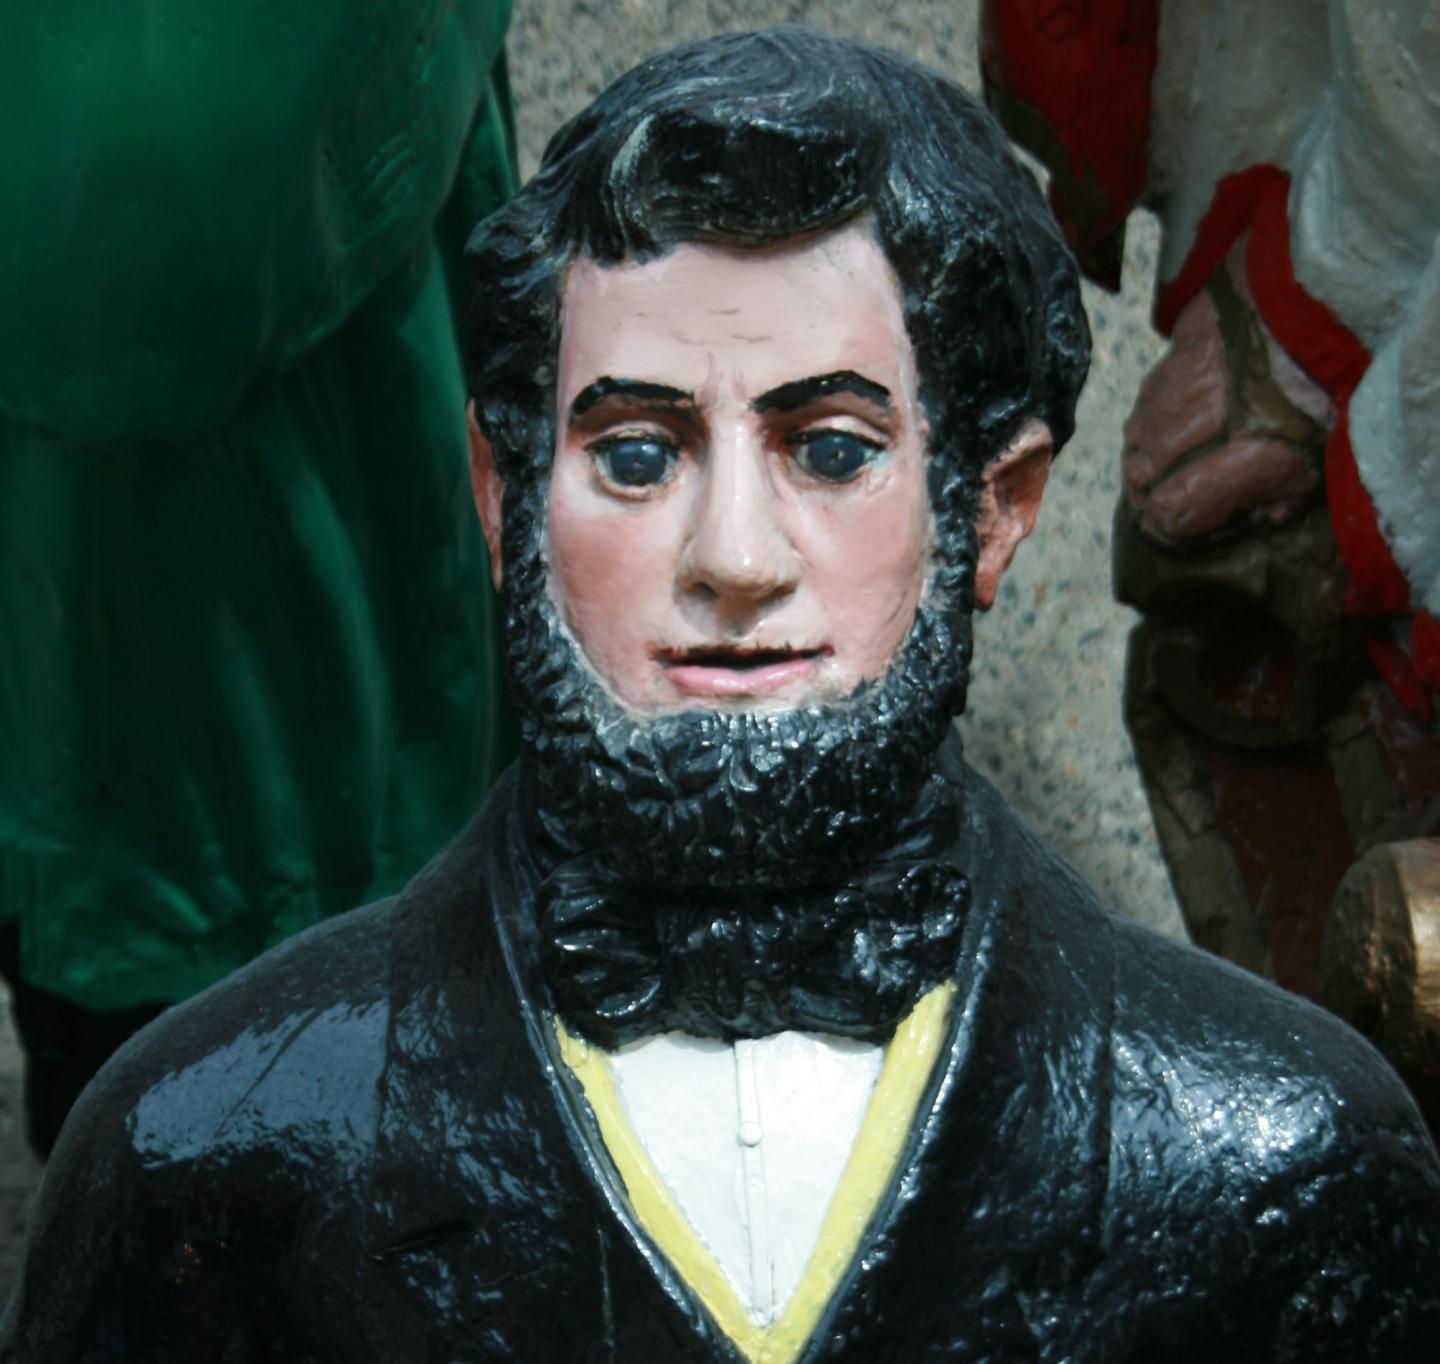 Lincoln, part of the figurehead collection at Cutty Sark